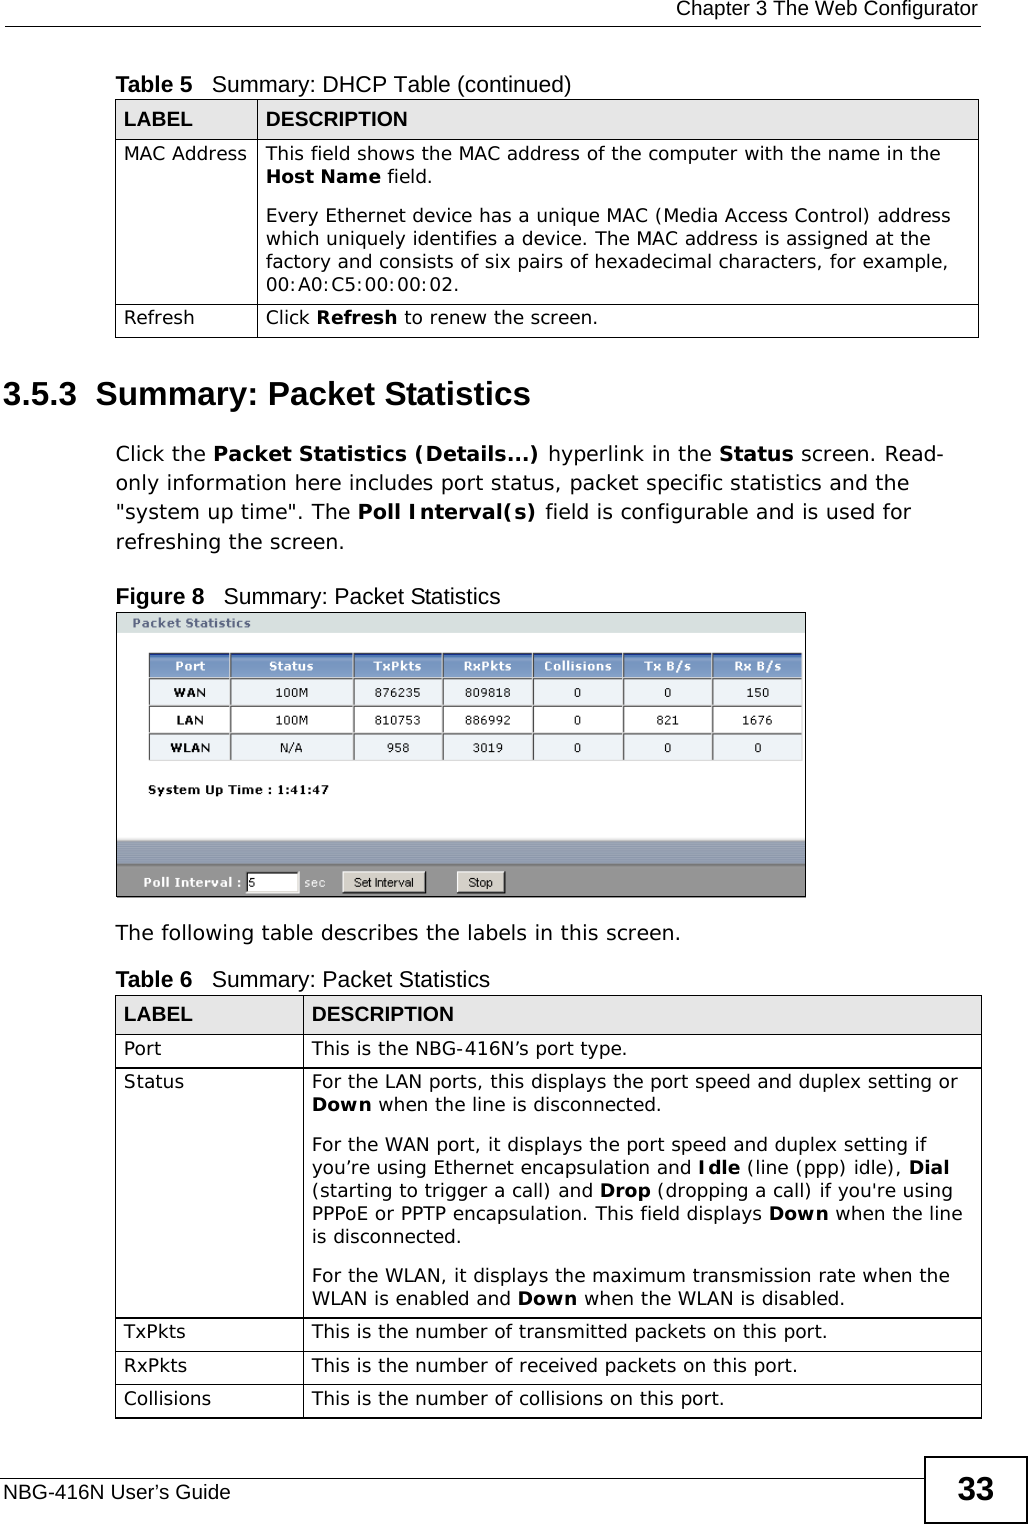  Chapter 3 The Web ConfiguratorNBG-416N User’s Guide 333.5.3  Summary: Packet Statistics   Click the Packet Statistics (Details...) hyperlink in the Status screen. Read-only information here includes port status, packet specific statistics and the &quot;system up time&quot;. The Poll Interval(s) field is configurable and is used for refreshing the screen.Figure 8   Summary: Packet Statistics The following table describes the labels in this screen.MAC Address This field shows the MAC address of the computer with the name in the Host Name field.Every Ethernet device has a unique MAC (Media Access Control) address which uniquely identifies a device. The MAC address is assigned at the factory and consists of six pairs of hexadecimal characters, for example, 00:A0:C5:00:00:02.Refresh Click Refresh to renew the screen. Table 5   Summary: DHCP Table (continued)LABEL  DESCRIPTIONTable 6   Summary: Packet StatisticsLABEL DESCRIPTIONPort This is the NBG-416N’s port type.Status  For the LAN ports, this displays the port speed and duplex setting or Down when the line is disconnected.For the WAN port, it displays the port speed and duplex setting if you’re using Ethernet encapsulation and Idle (line (ppp) idle), Dial (starting to trigger a call) and Drop (dropping a call) if you&apos;re using PPPoE or PPTP encapsulation. This field displays Down when the line is disconnected.For the WLAN, it displays the maximum transmission rate when the WLAN is enabled and Down when the WLAN is disabled.TxPkts  This is the number of transmitted packets on this port.RxPkts  This is the number of received packets on this port.Collisions  This is the number of collisions on this port.